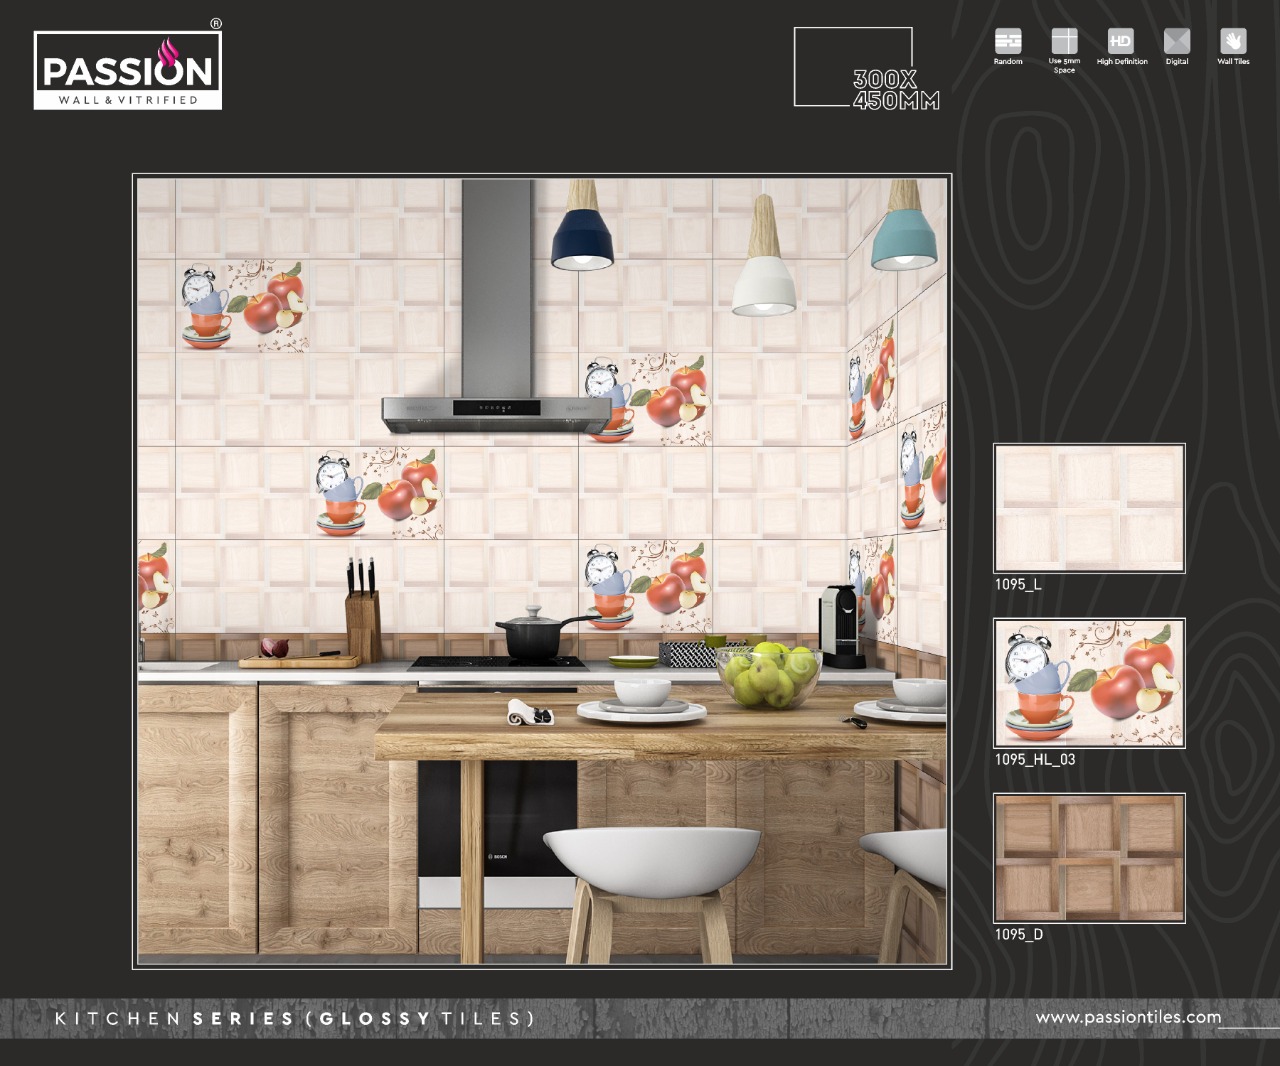 Wall Tiles - Kitchen Series (Glossy Tiles) from Passion Vitrified